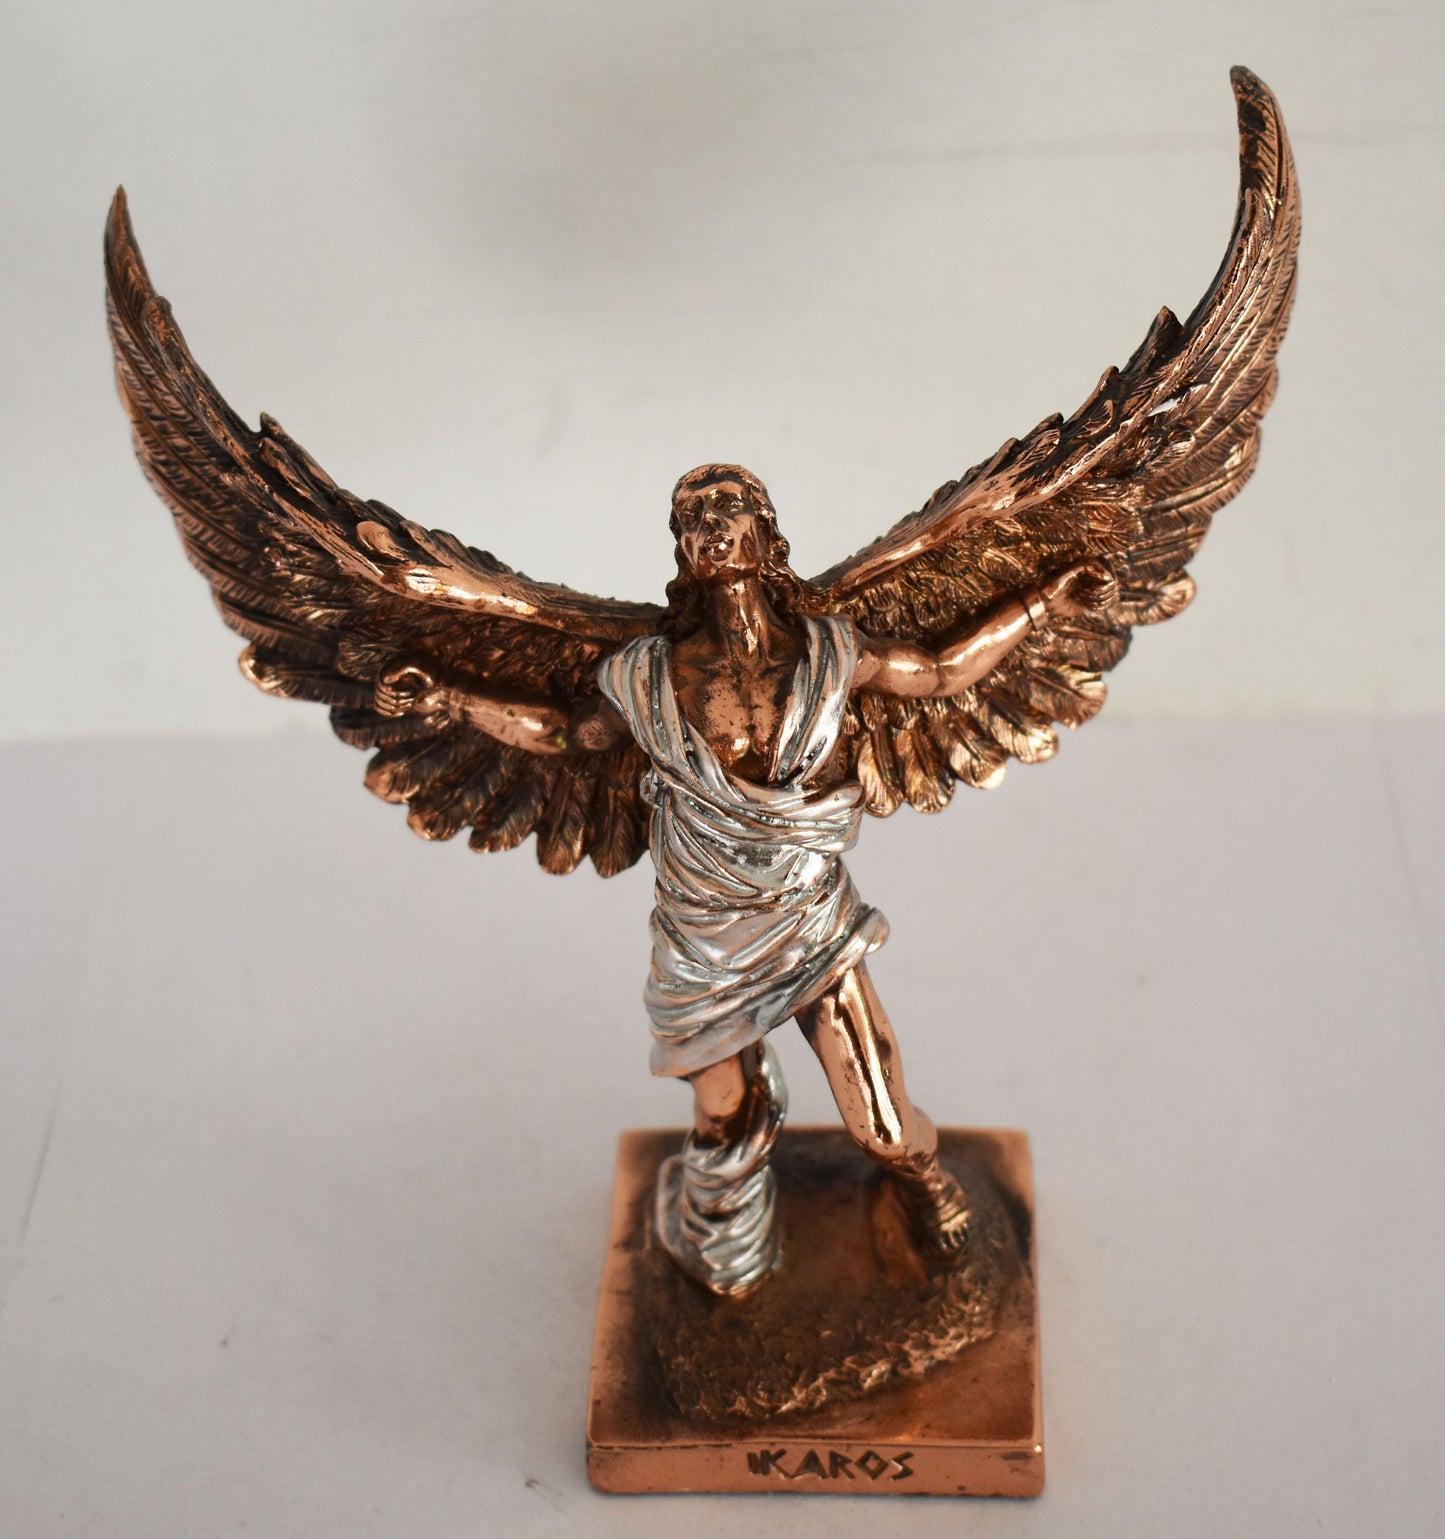 Icarus - Son of Daedalus - Escape from Crete with Wings from Wax and Drowned - Don't Fly Too Close to the Sun - Copper Plated Alabaster